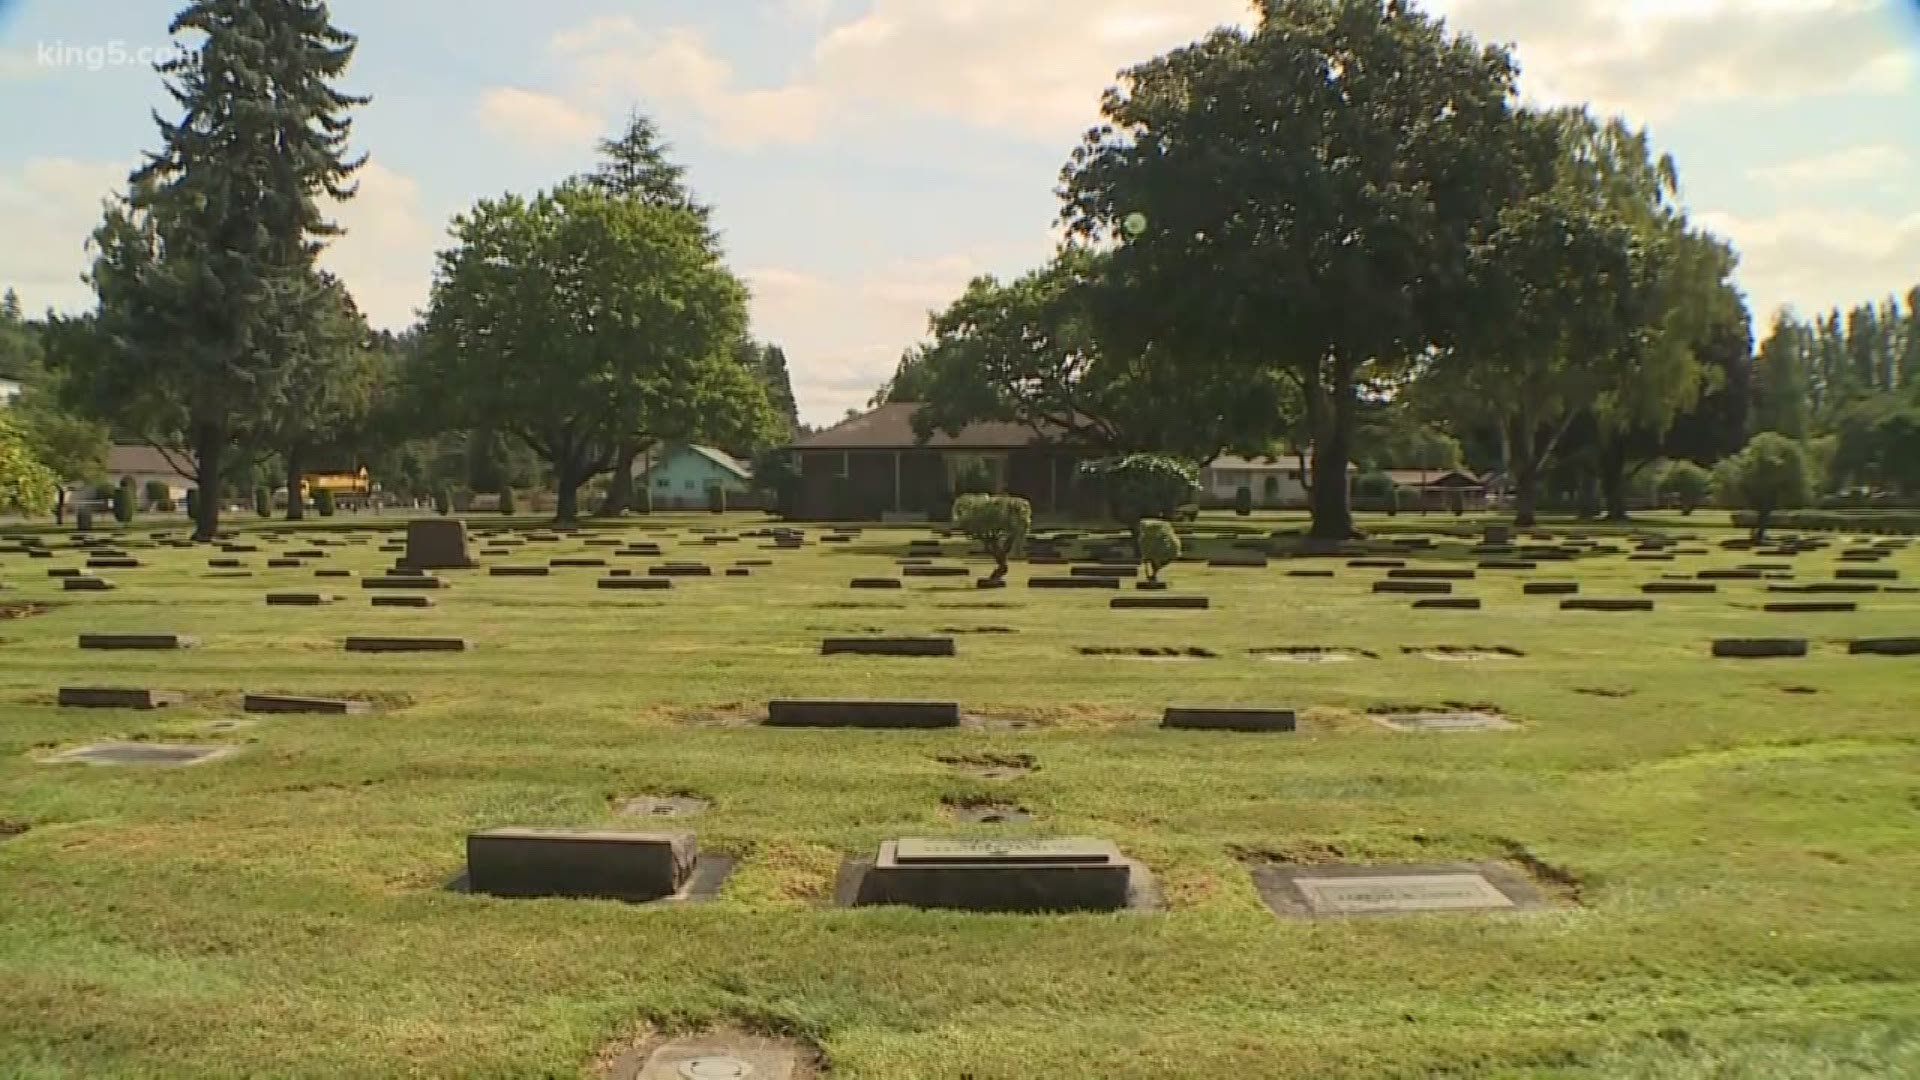 Cremation trends helping clear up land space for burials.